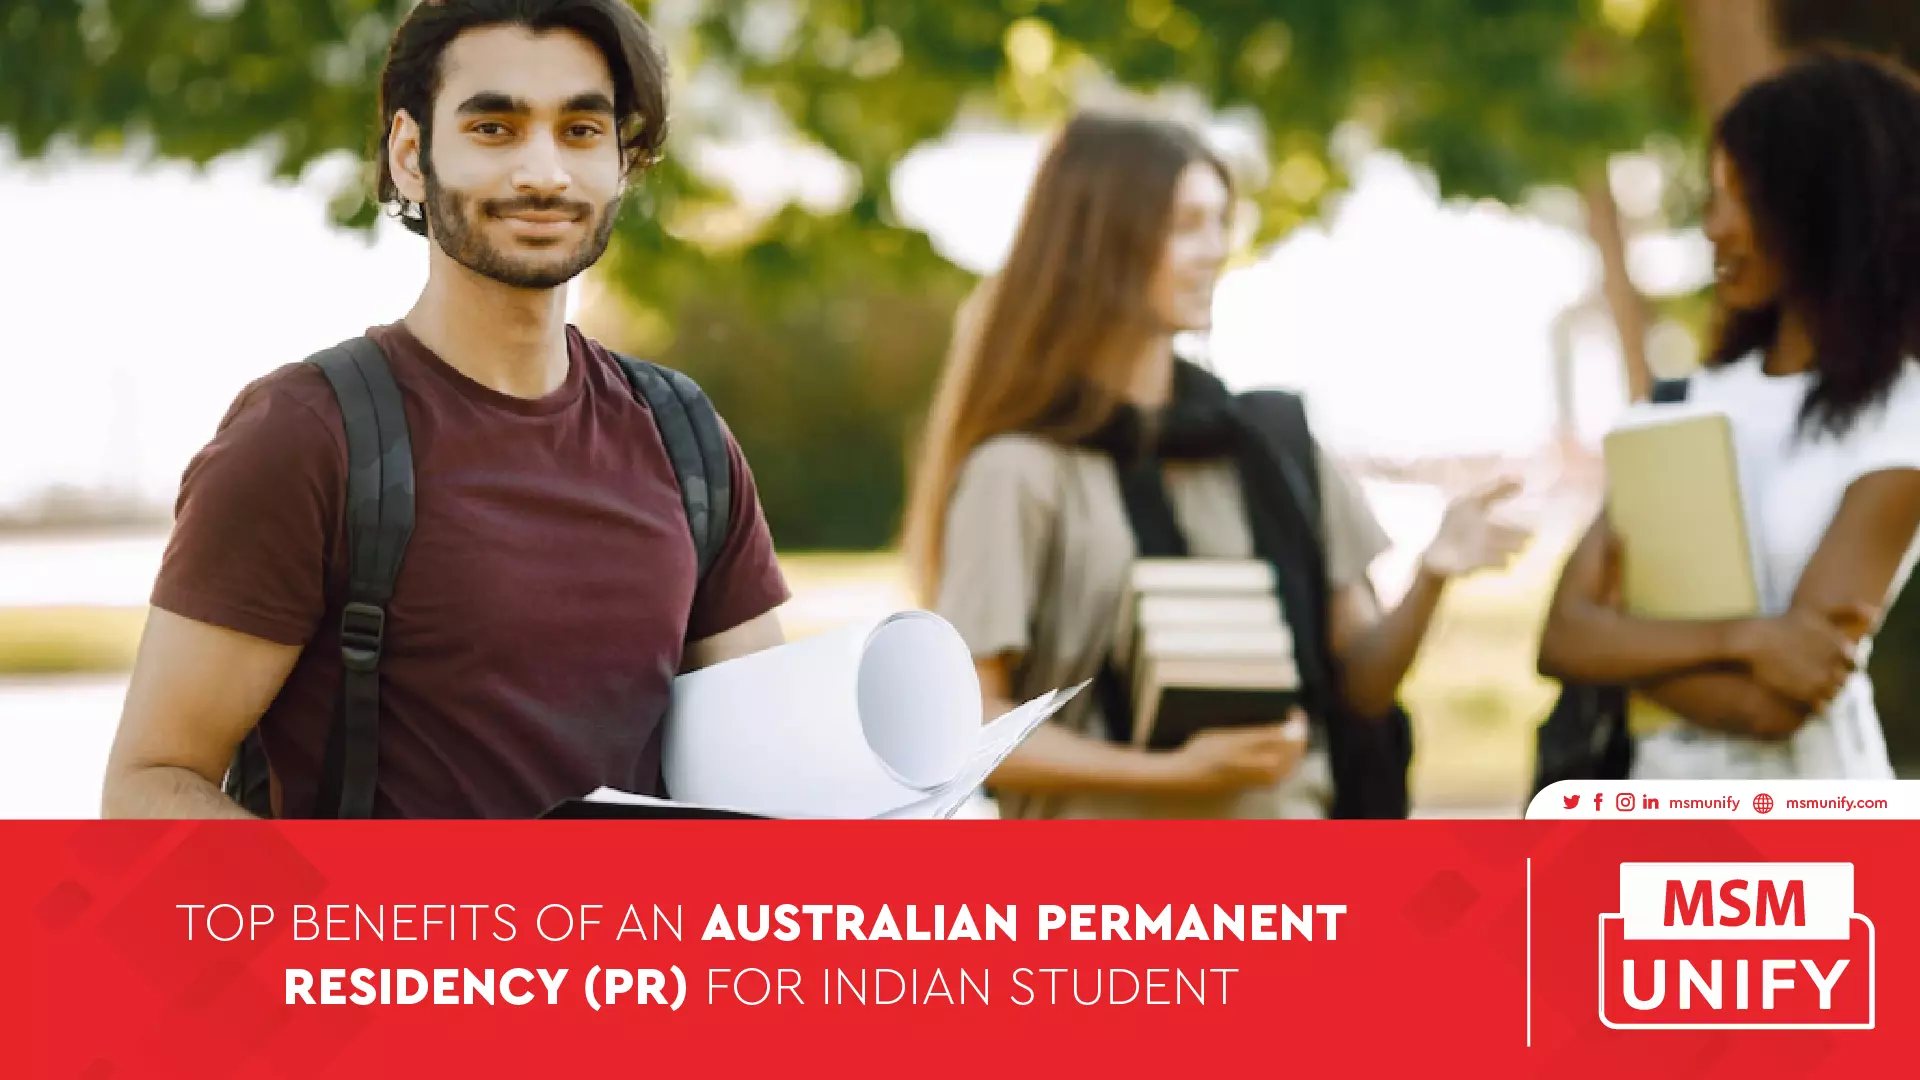 010623 MSM Unify Top Benefits of an Australian Permanent Residency PR for Indian Student 01